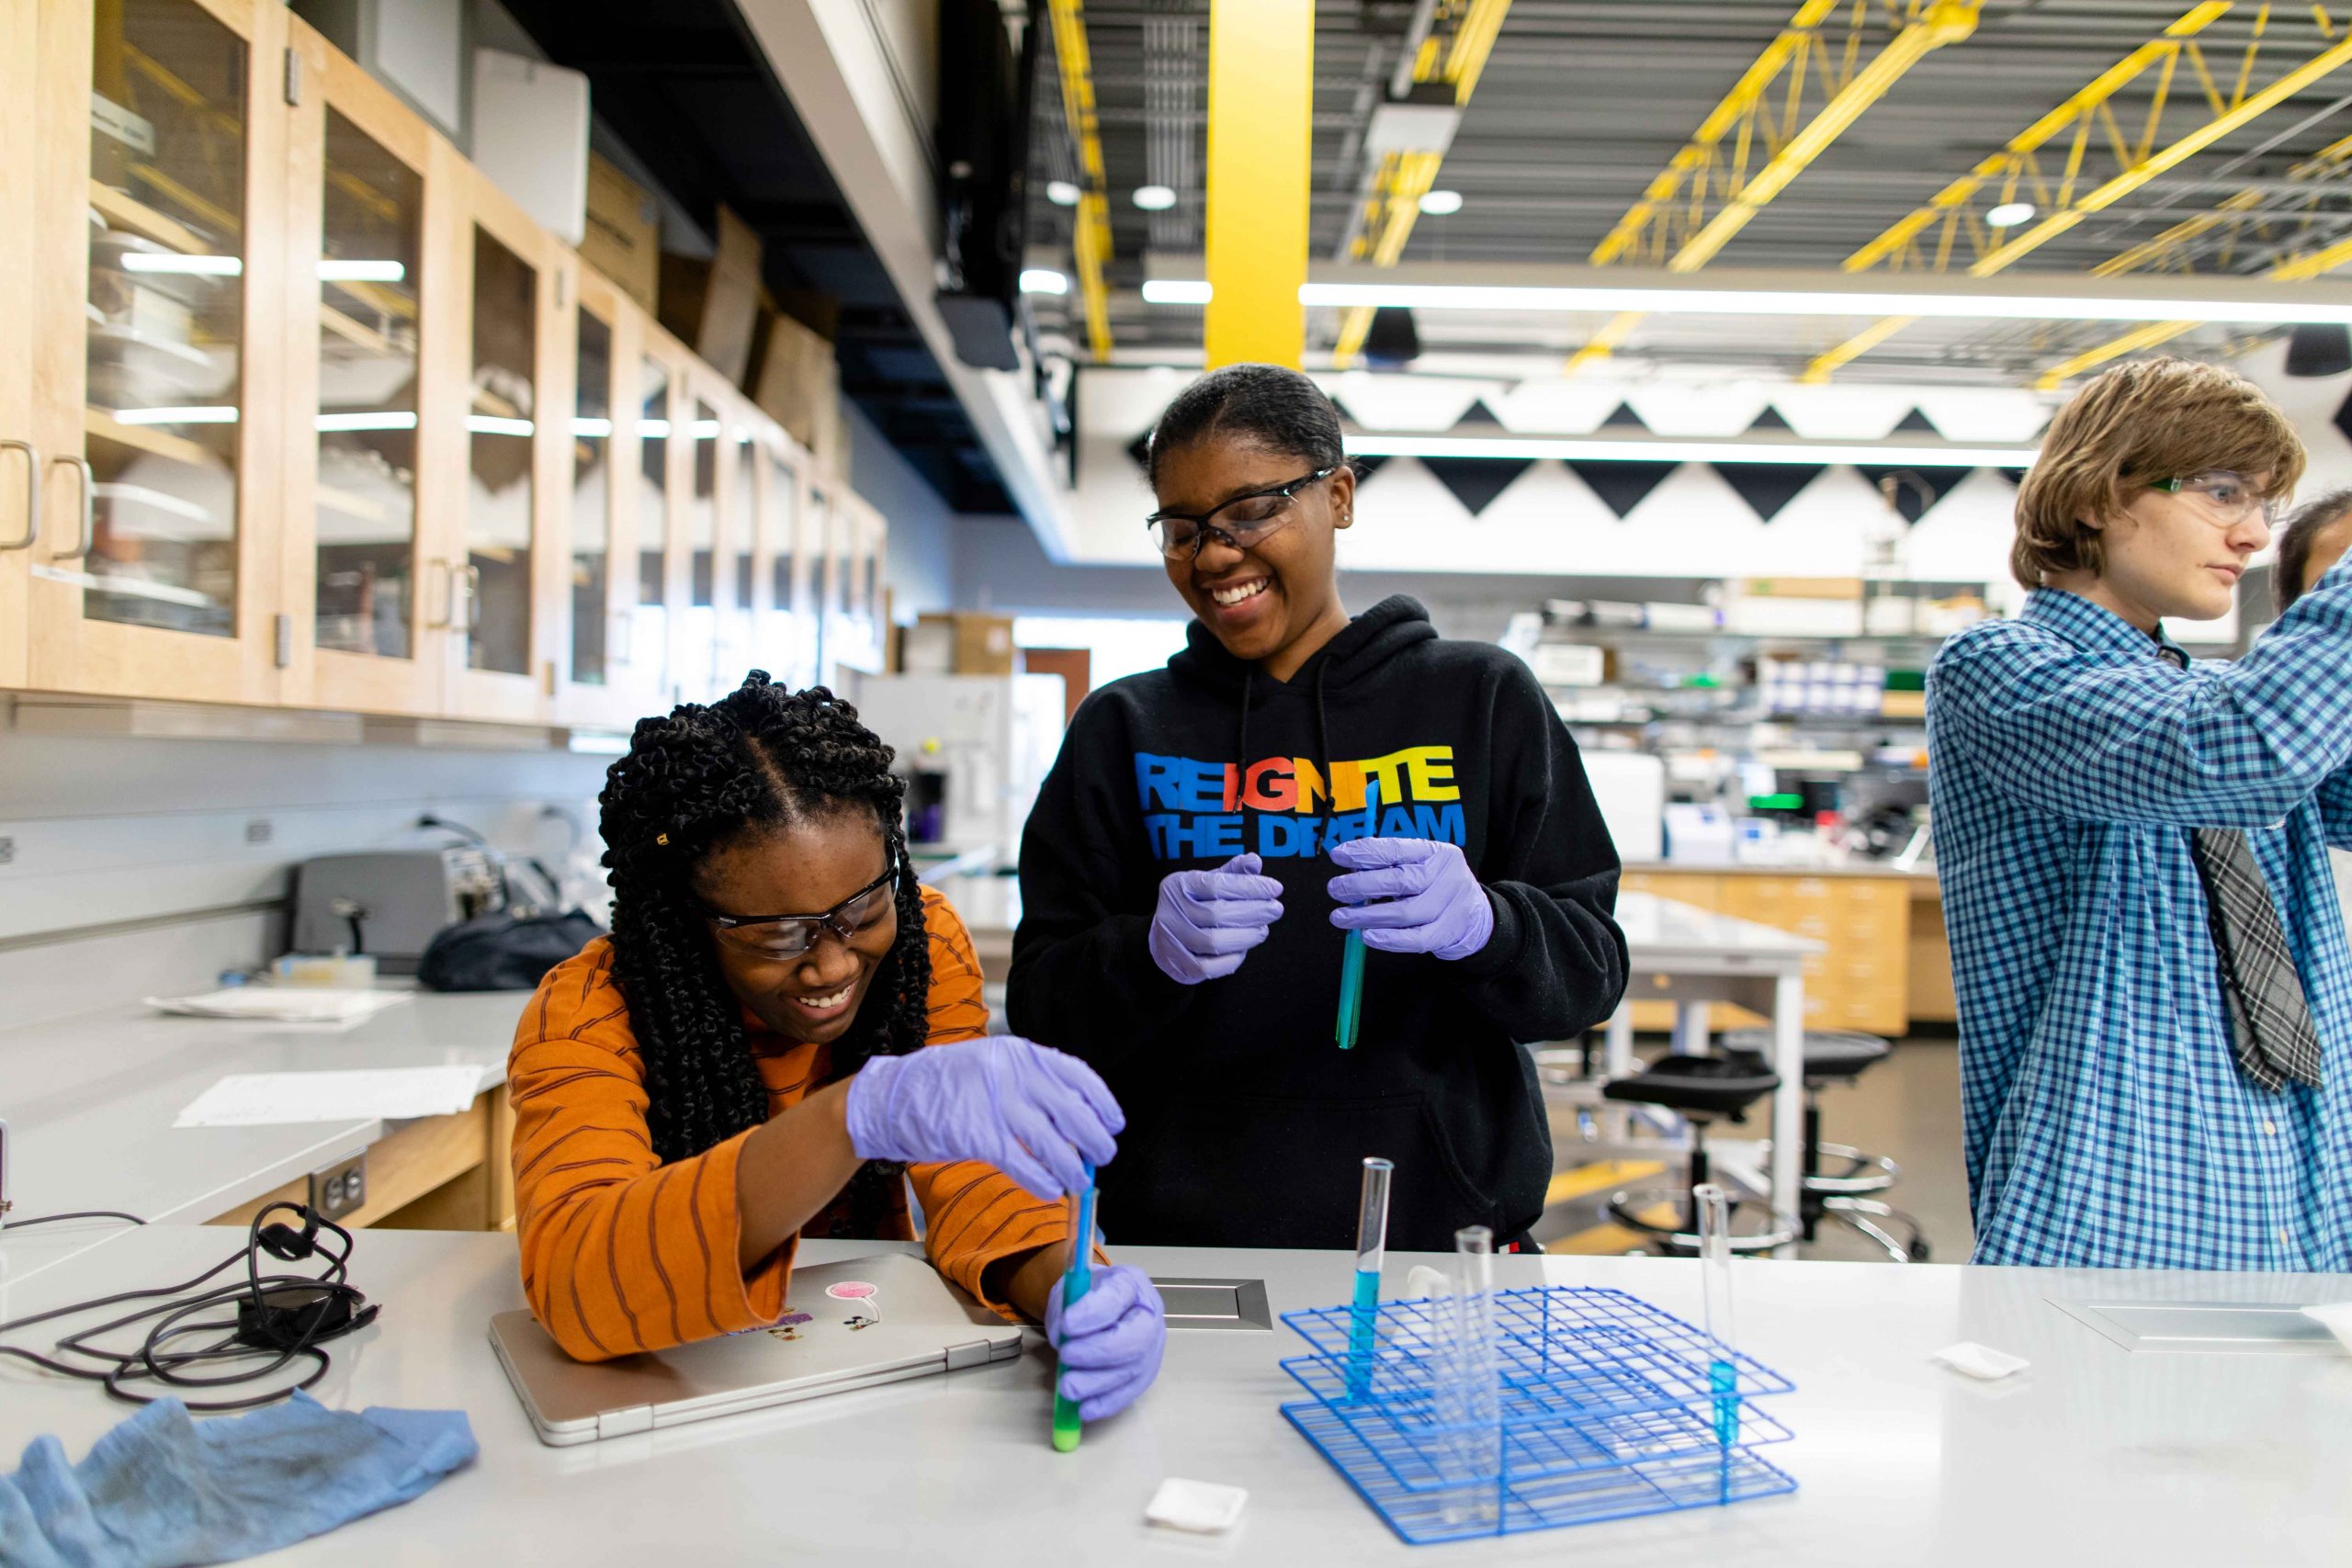 In the science lab, two students examine test tubes while smiling and laughing. 